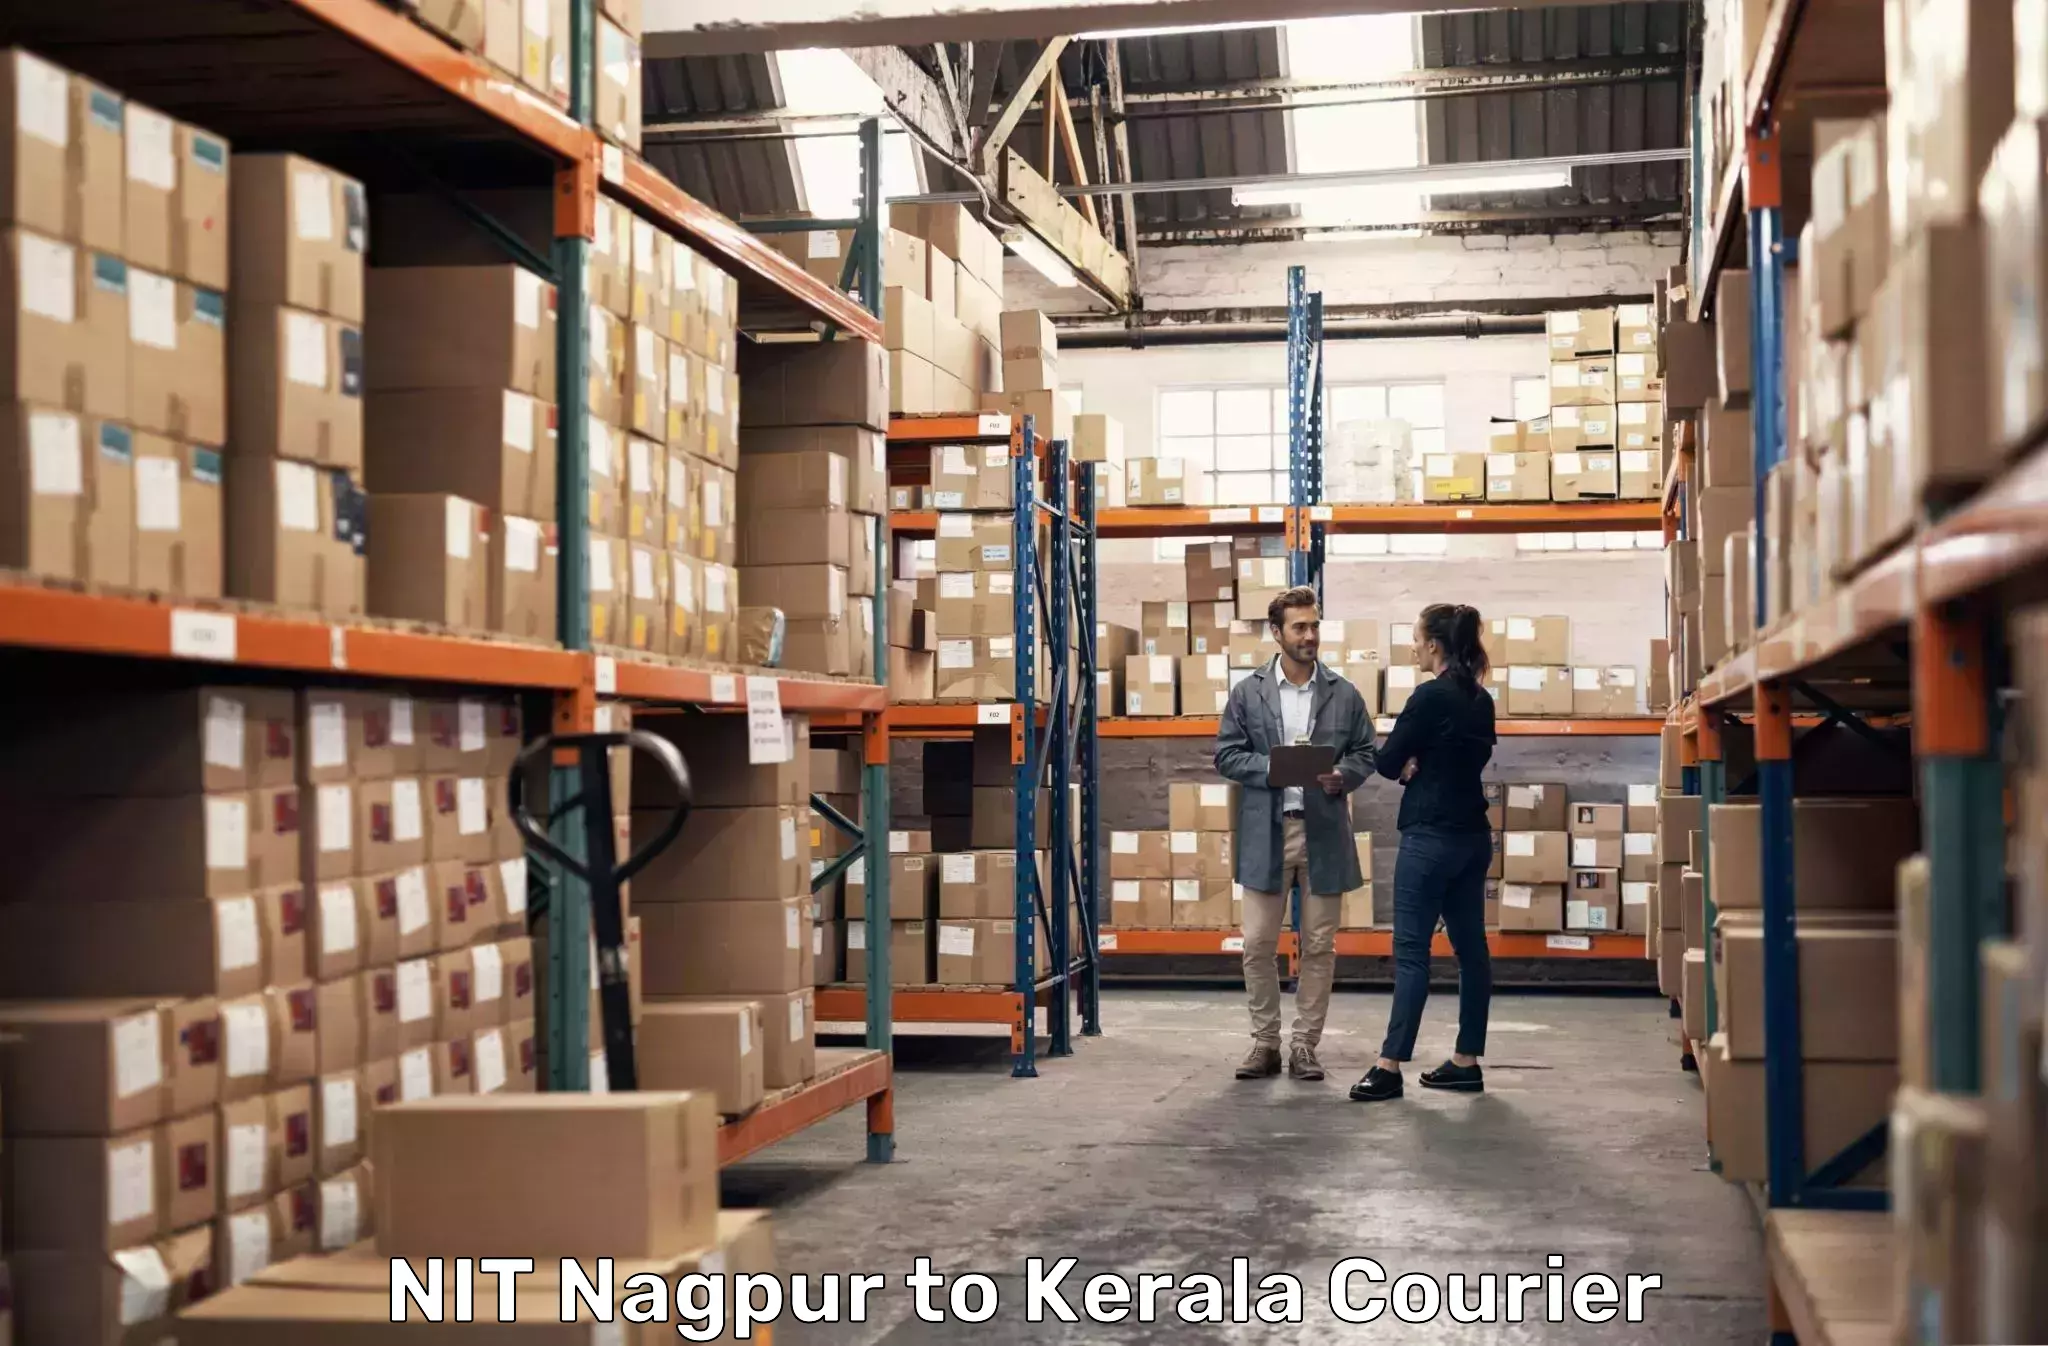 Express delivery capabilities in NIT Nagpur to Tirur